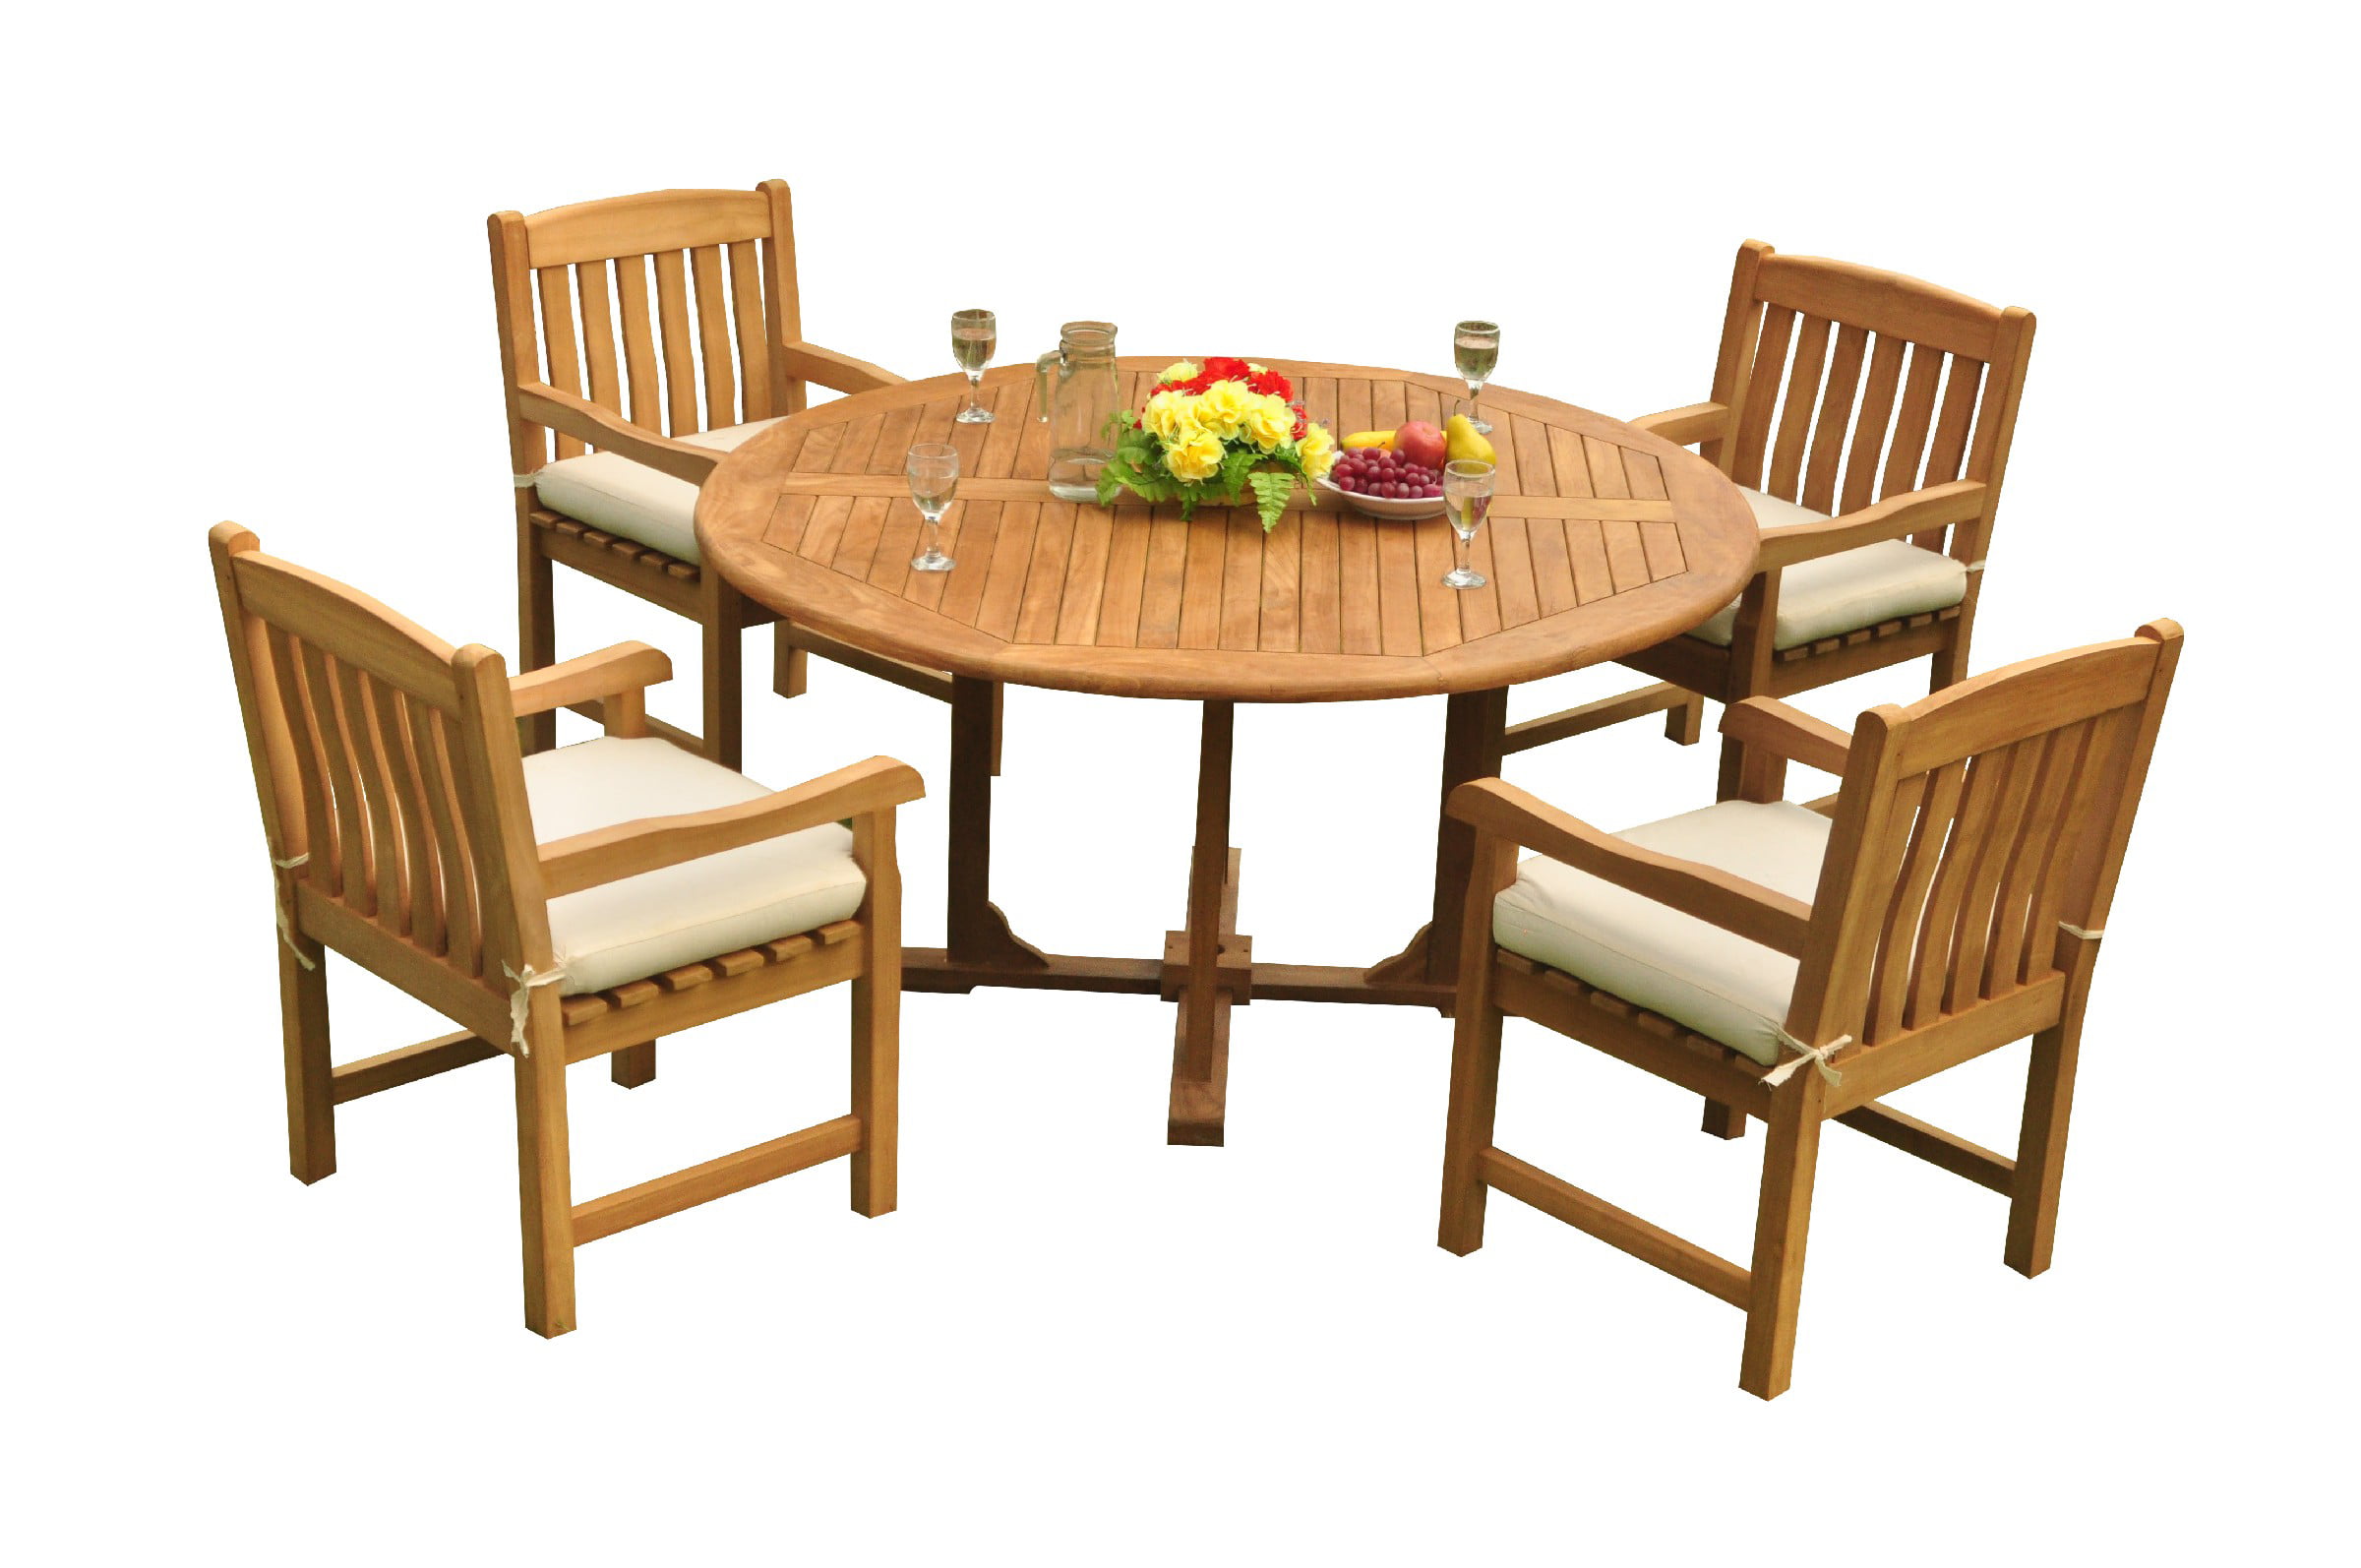 Panana Wooden Folding Picnic Table with 4 Chairs Solid Acacia Wood 4 Seater Dining Furniture Set Indoor Outdoor Garden Patio Bistro